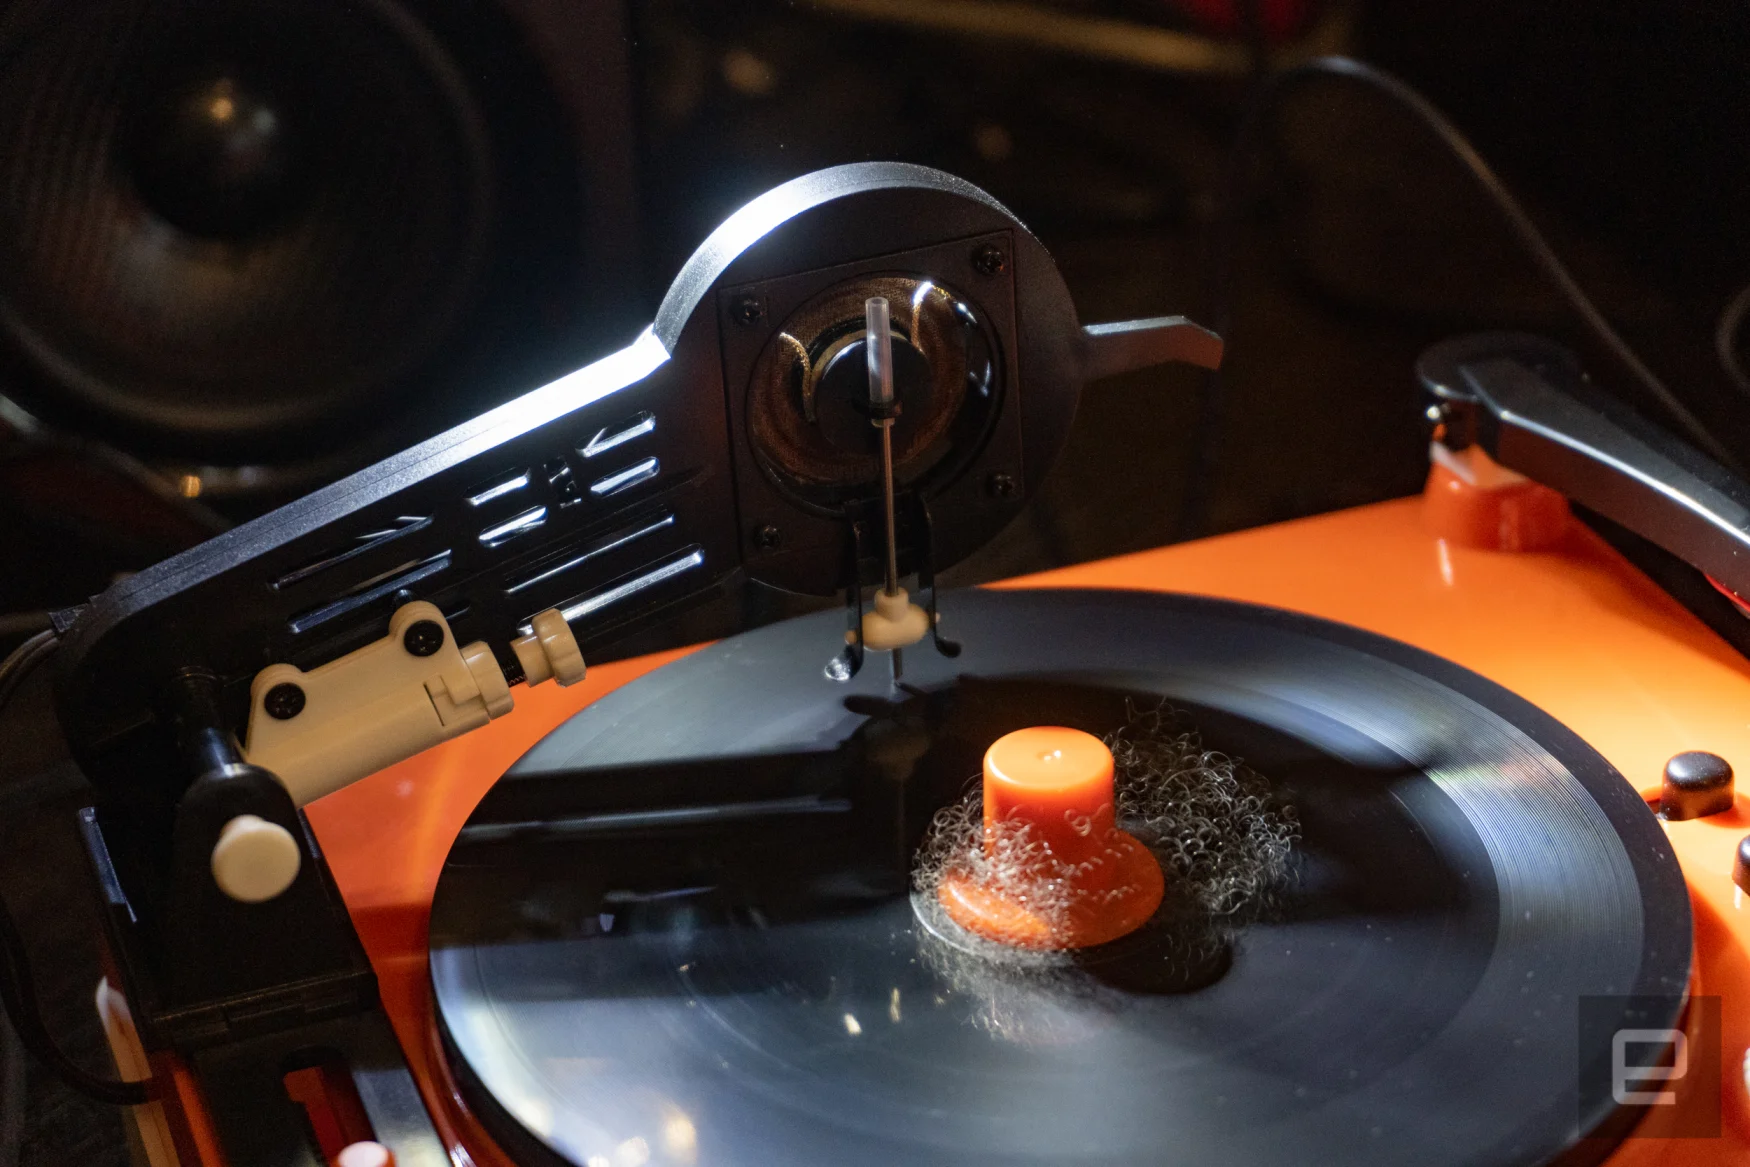 A turntable with an arm that ends in a cutter, touching a black disc.